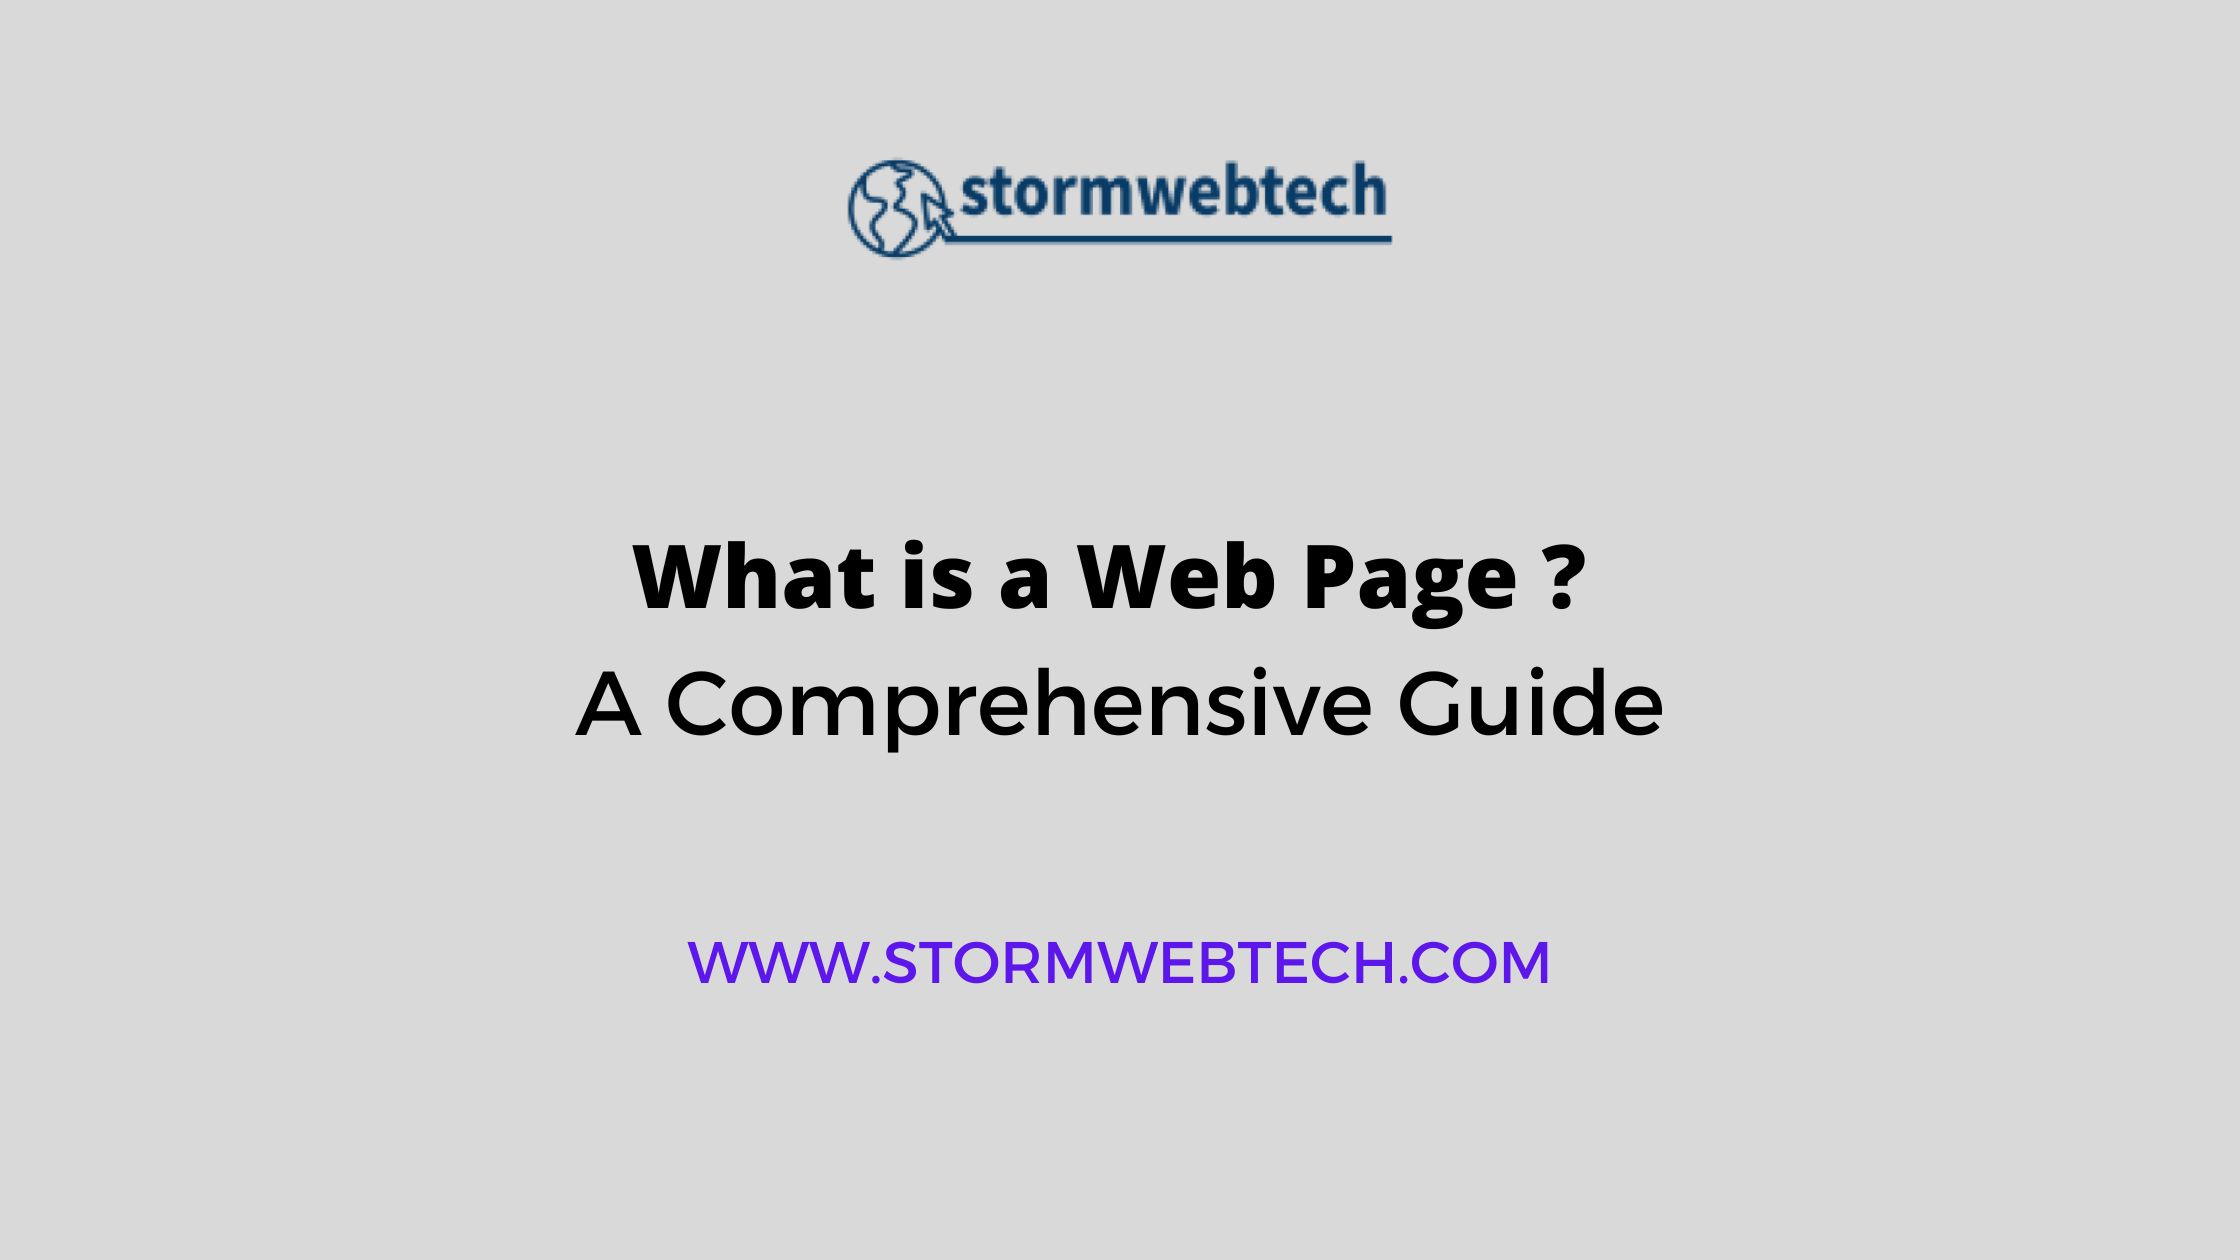 What is a Web Page, the ins and outs of web pages, their characteristics, types, and the elements that make them function